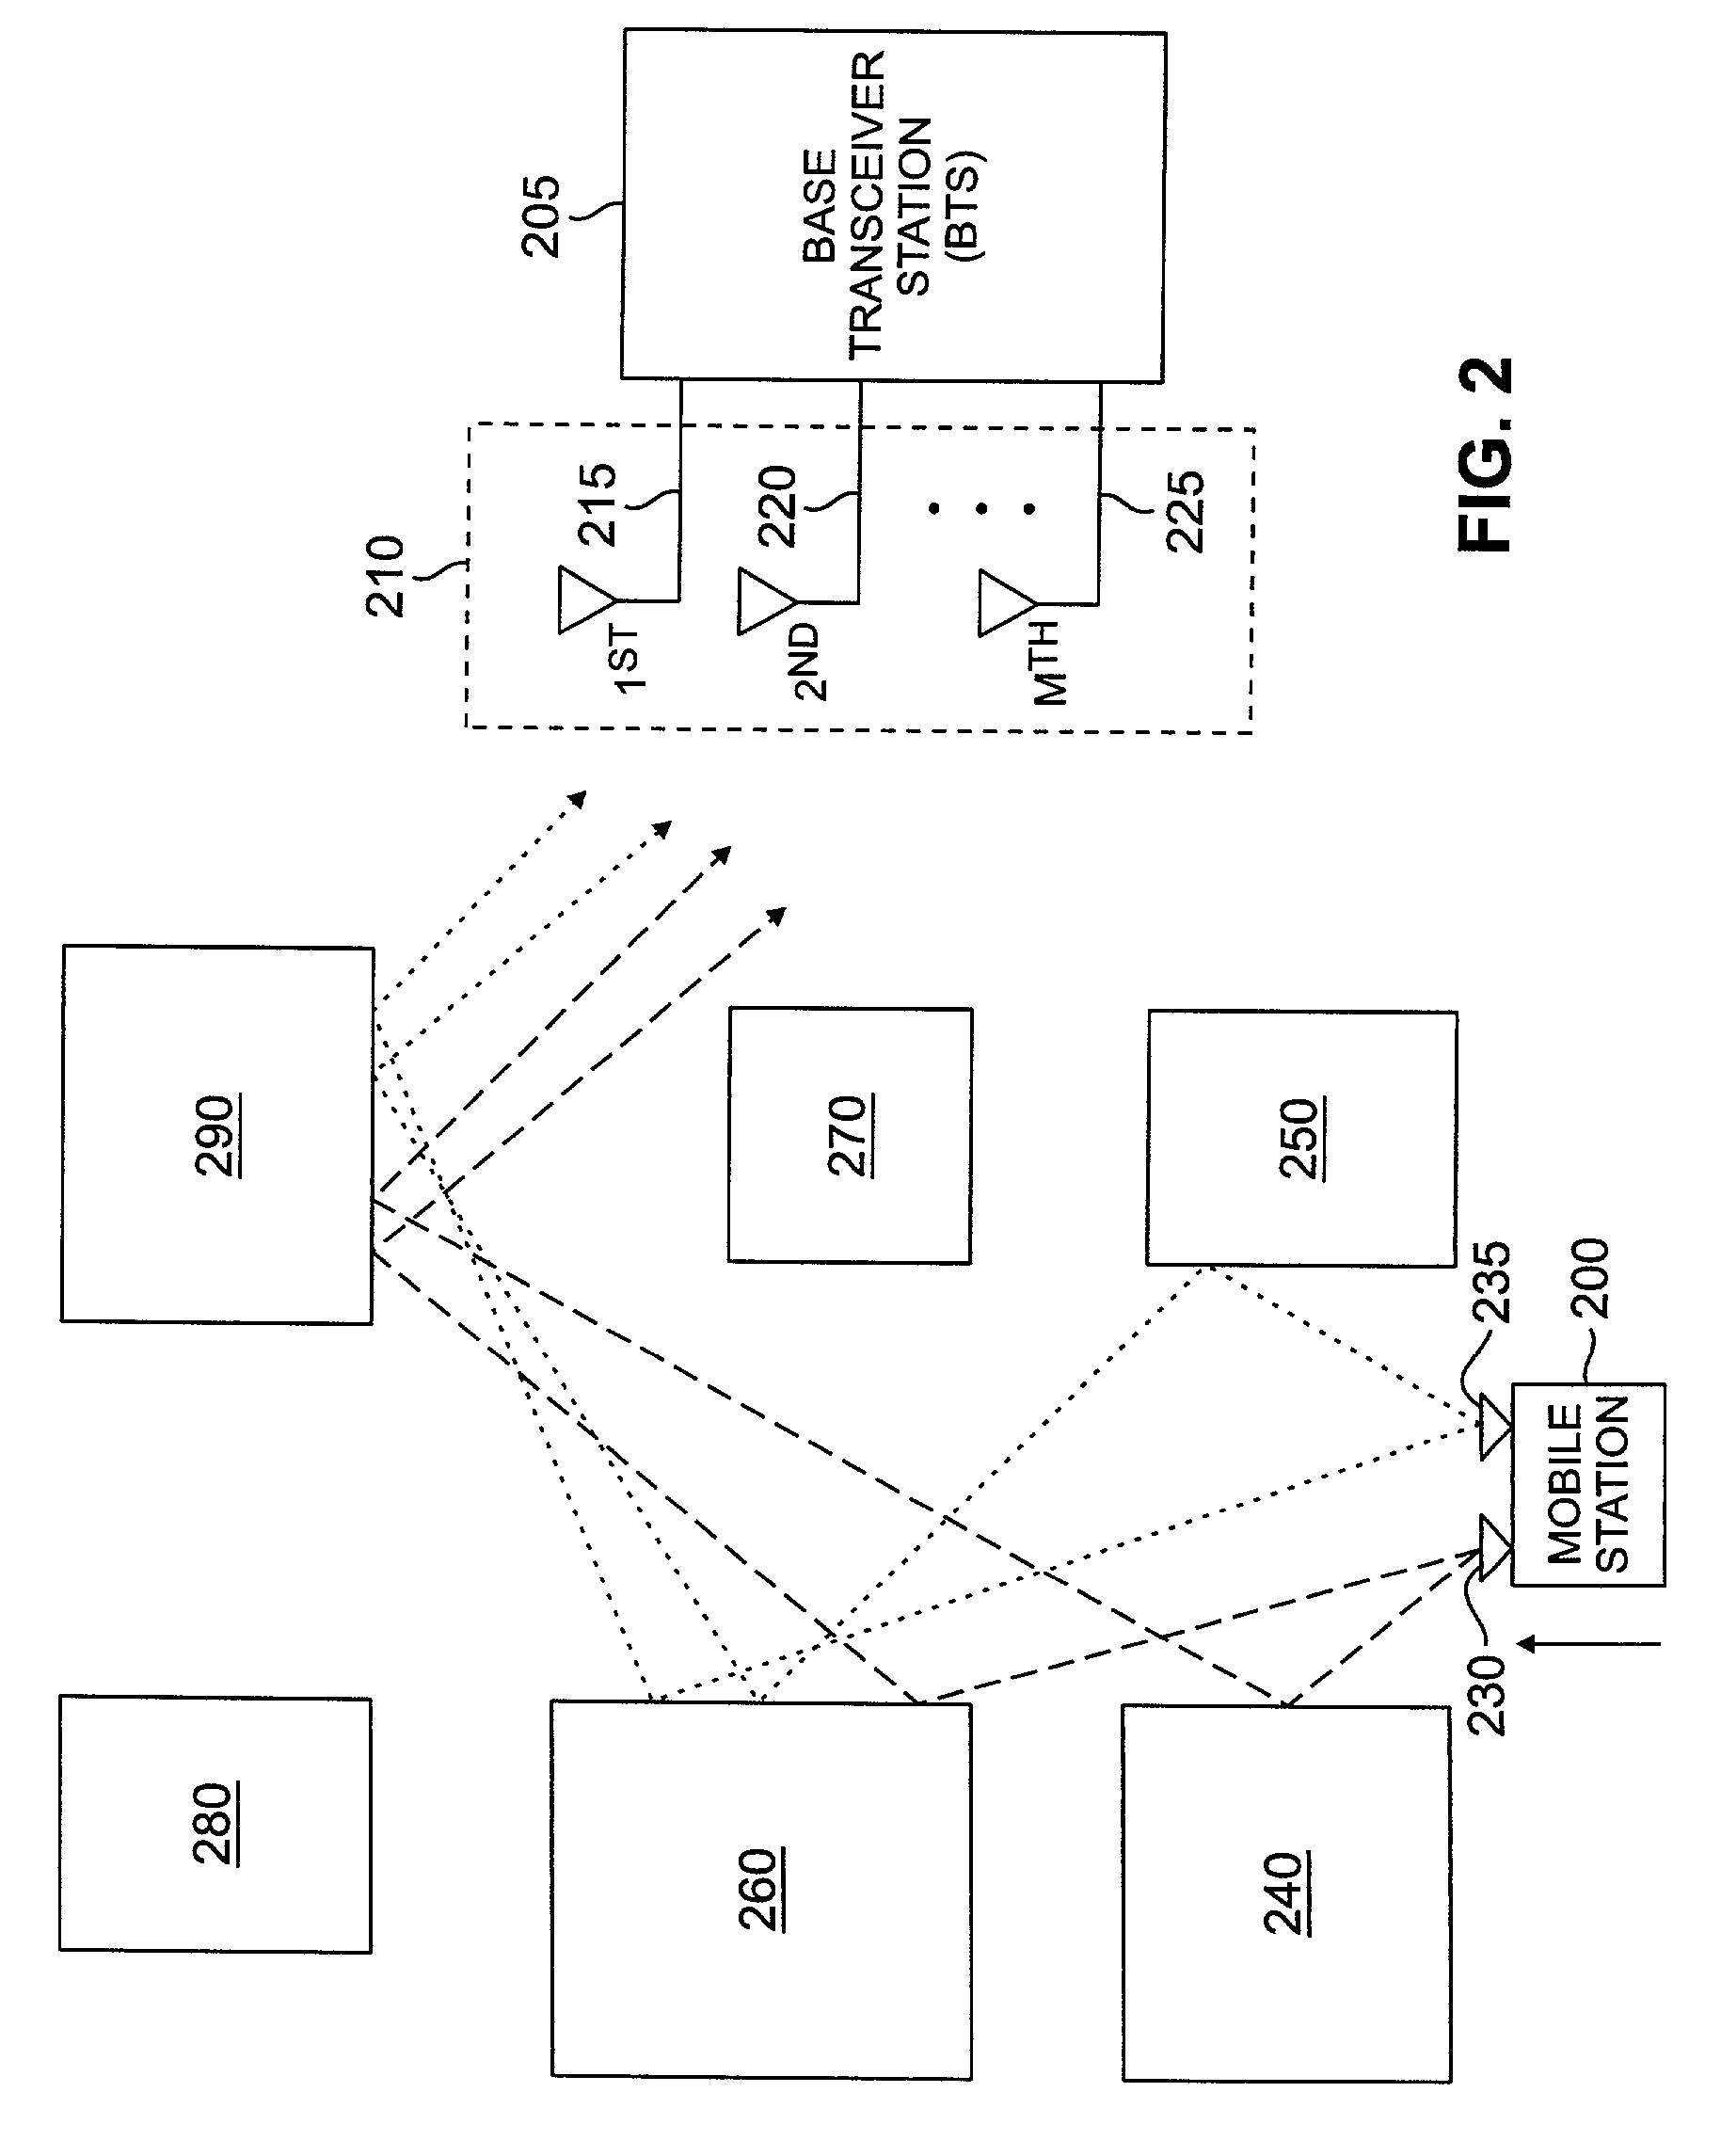 System and method for improving performance of an adaptive antenna array in a vehicular environment